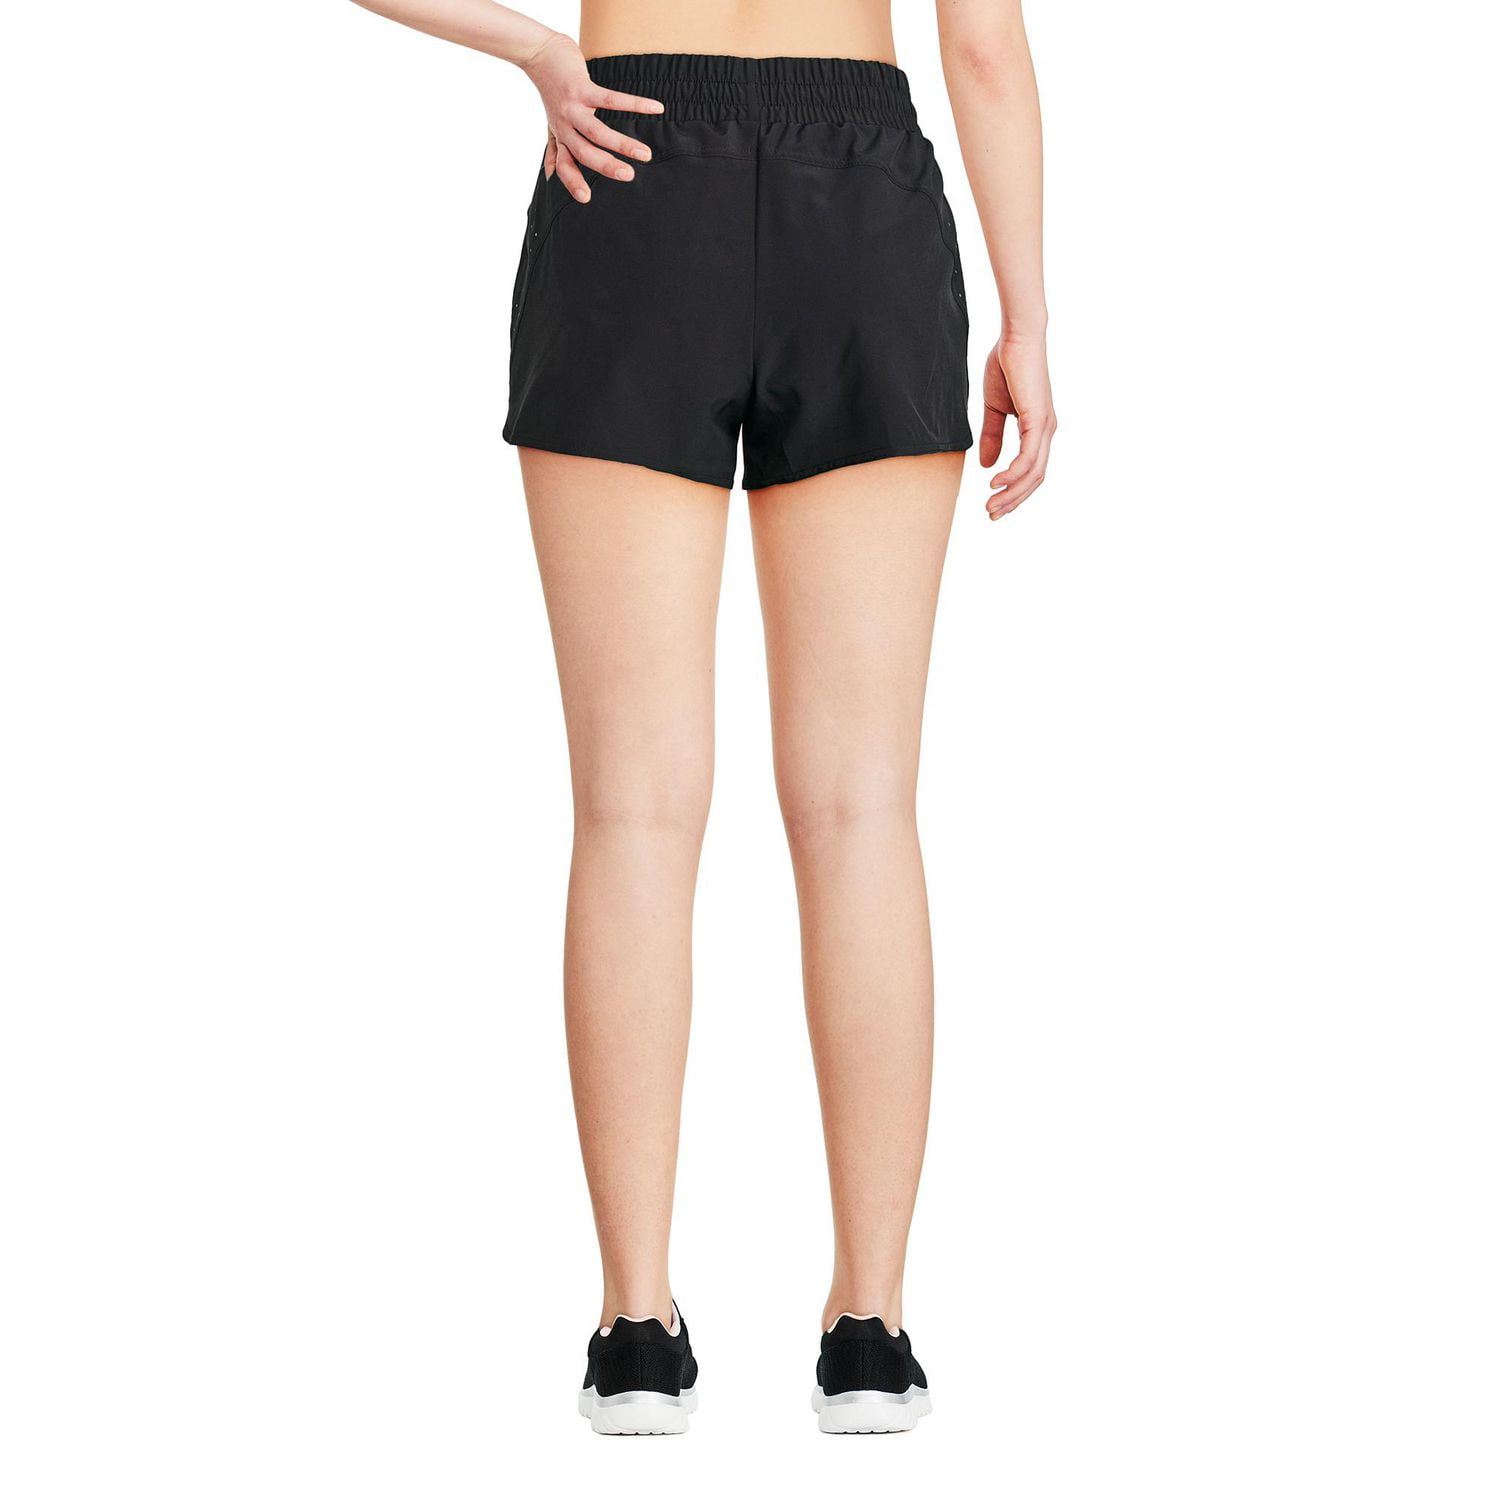 New!Athletic Works Running Shorts With Liner. Size XXXL(22). Great Gym  Shorts!